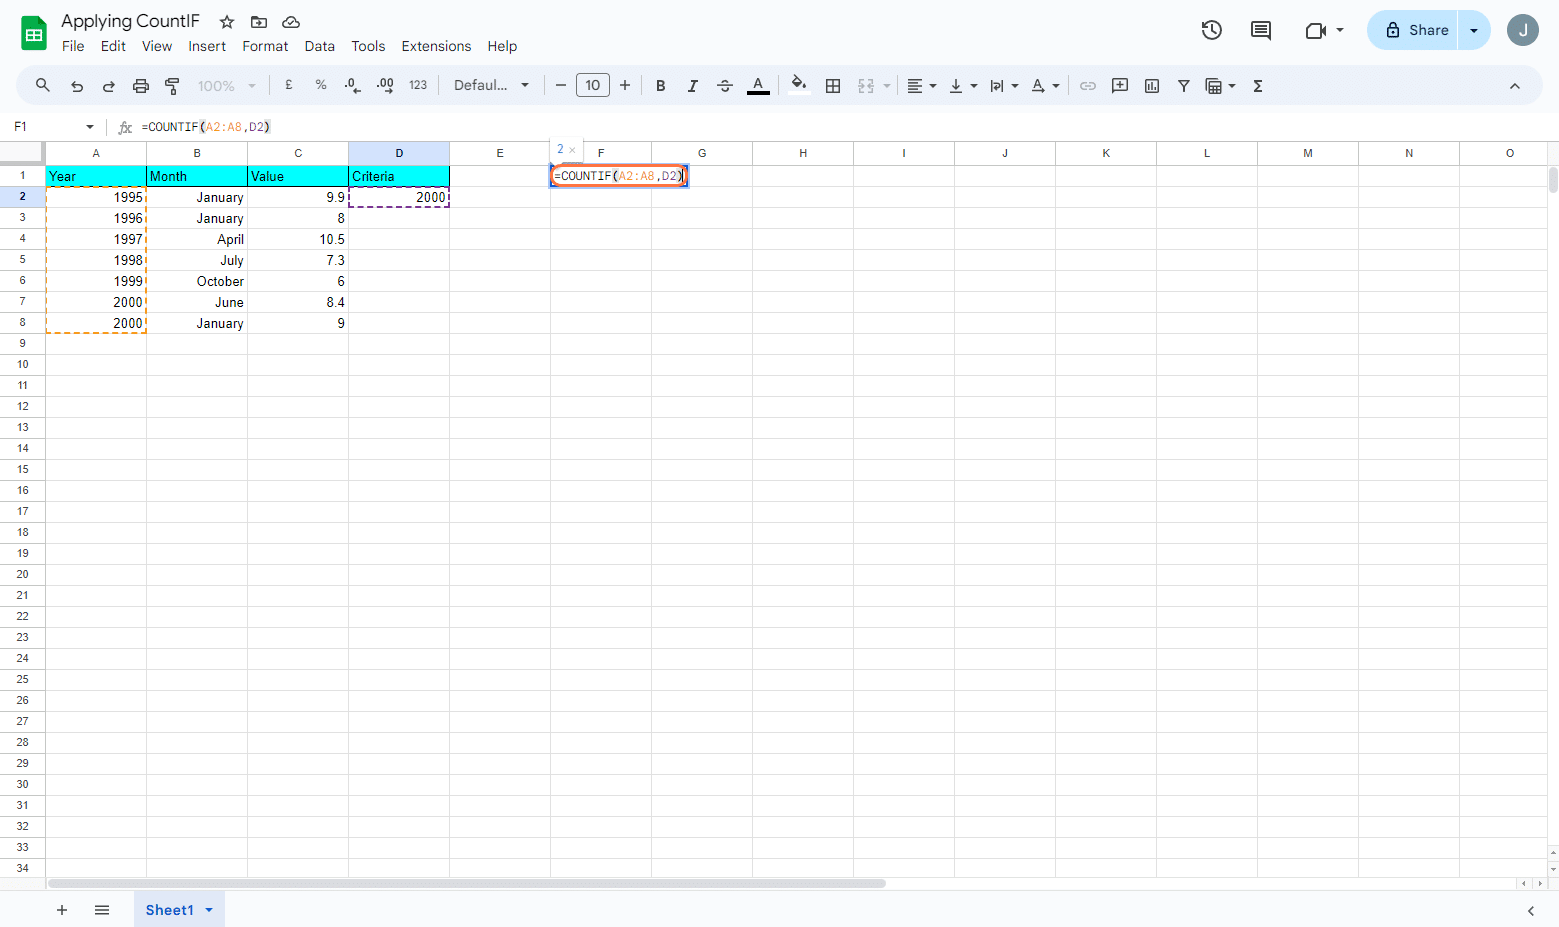 executing COUNTIF formula and displaying the count of 2000 in the Year column